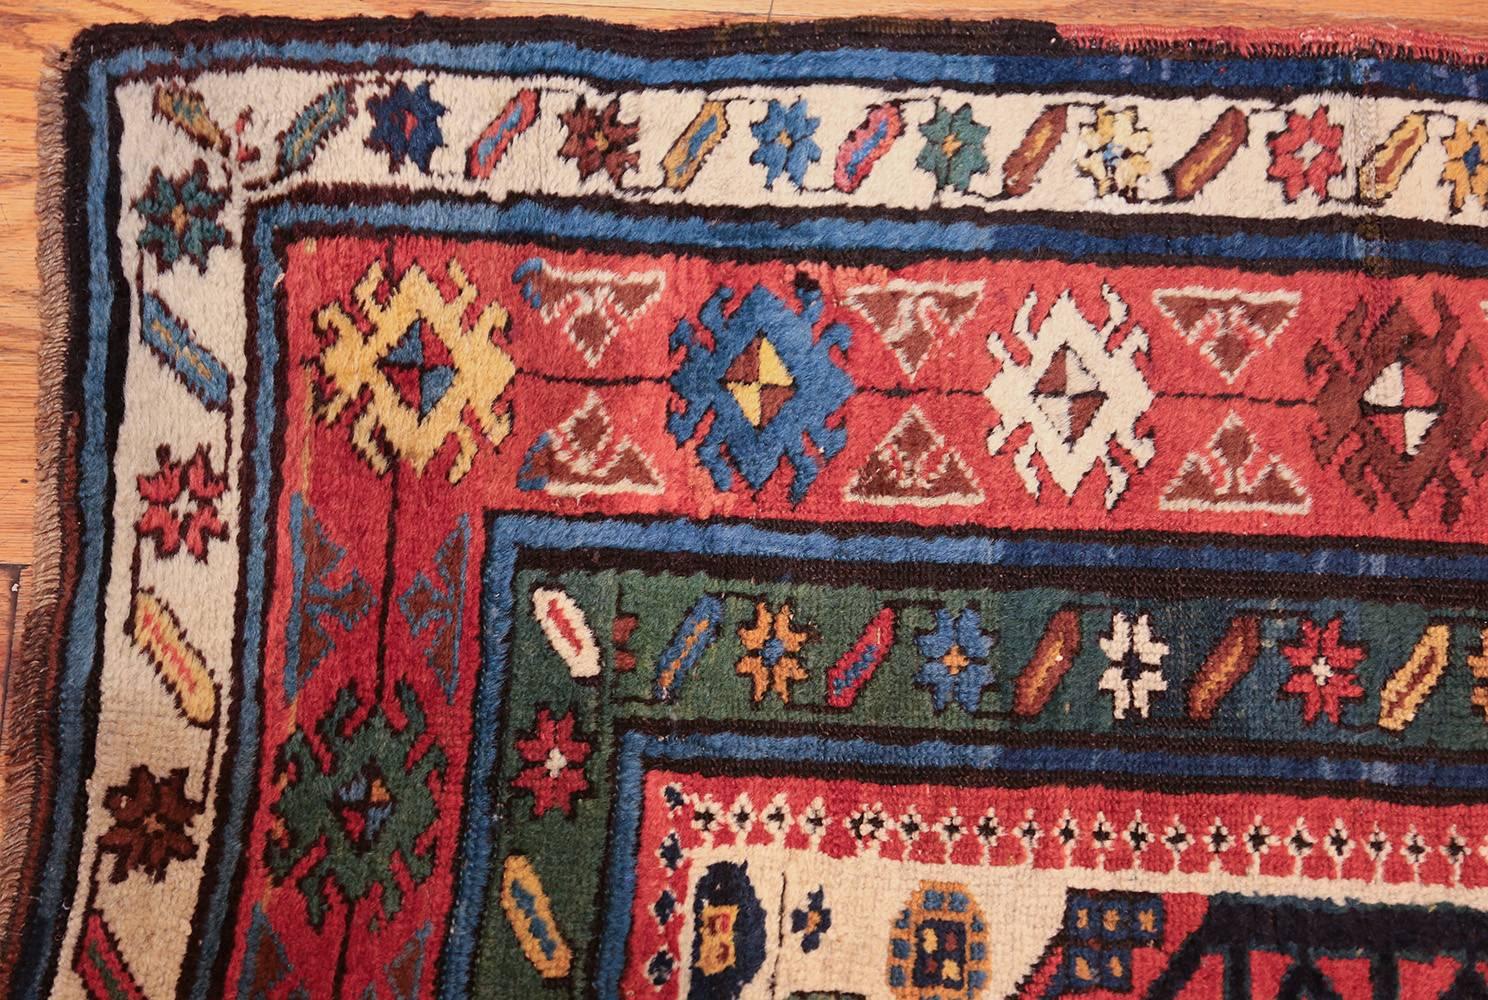 Epitomizing the strong artistic style of Kazak weavers, this grand antique Caucasian rug depicts a bold stacked-lozenge composition decorated with vibrant accents.

Antique Caucasian Kazak runner rug, origin: Caucasus, circa early 20th century.